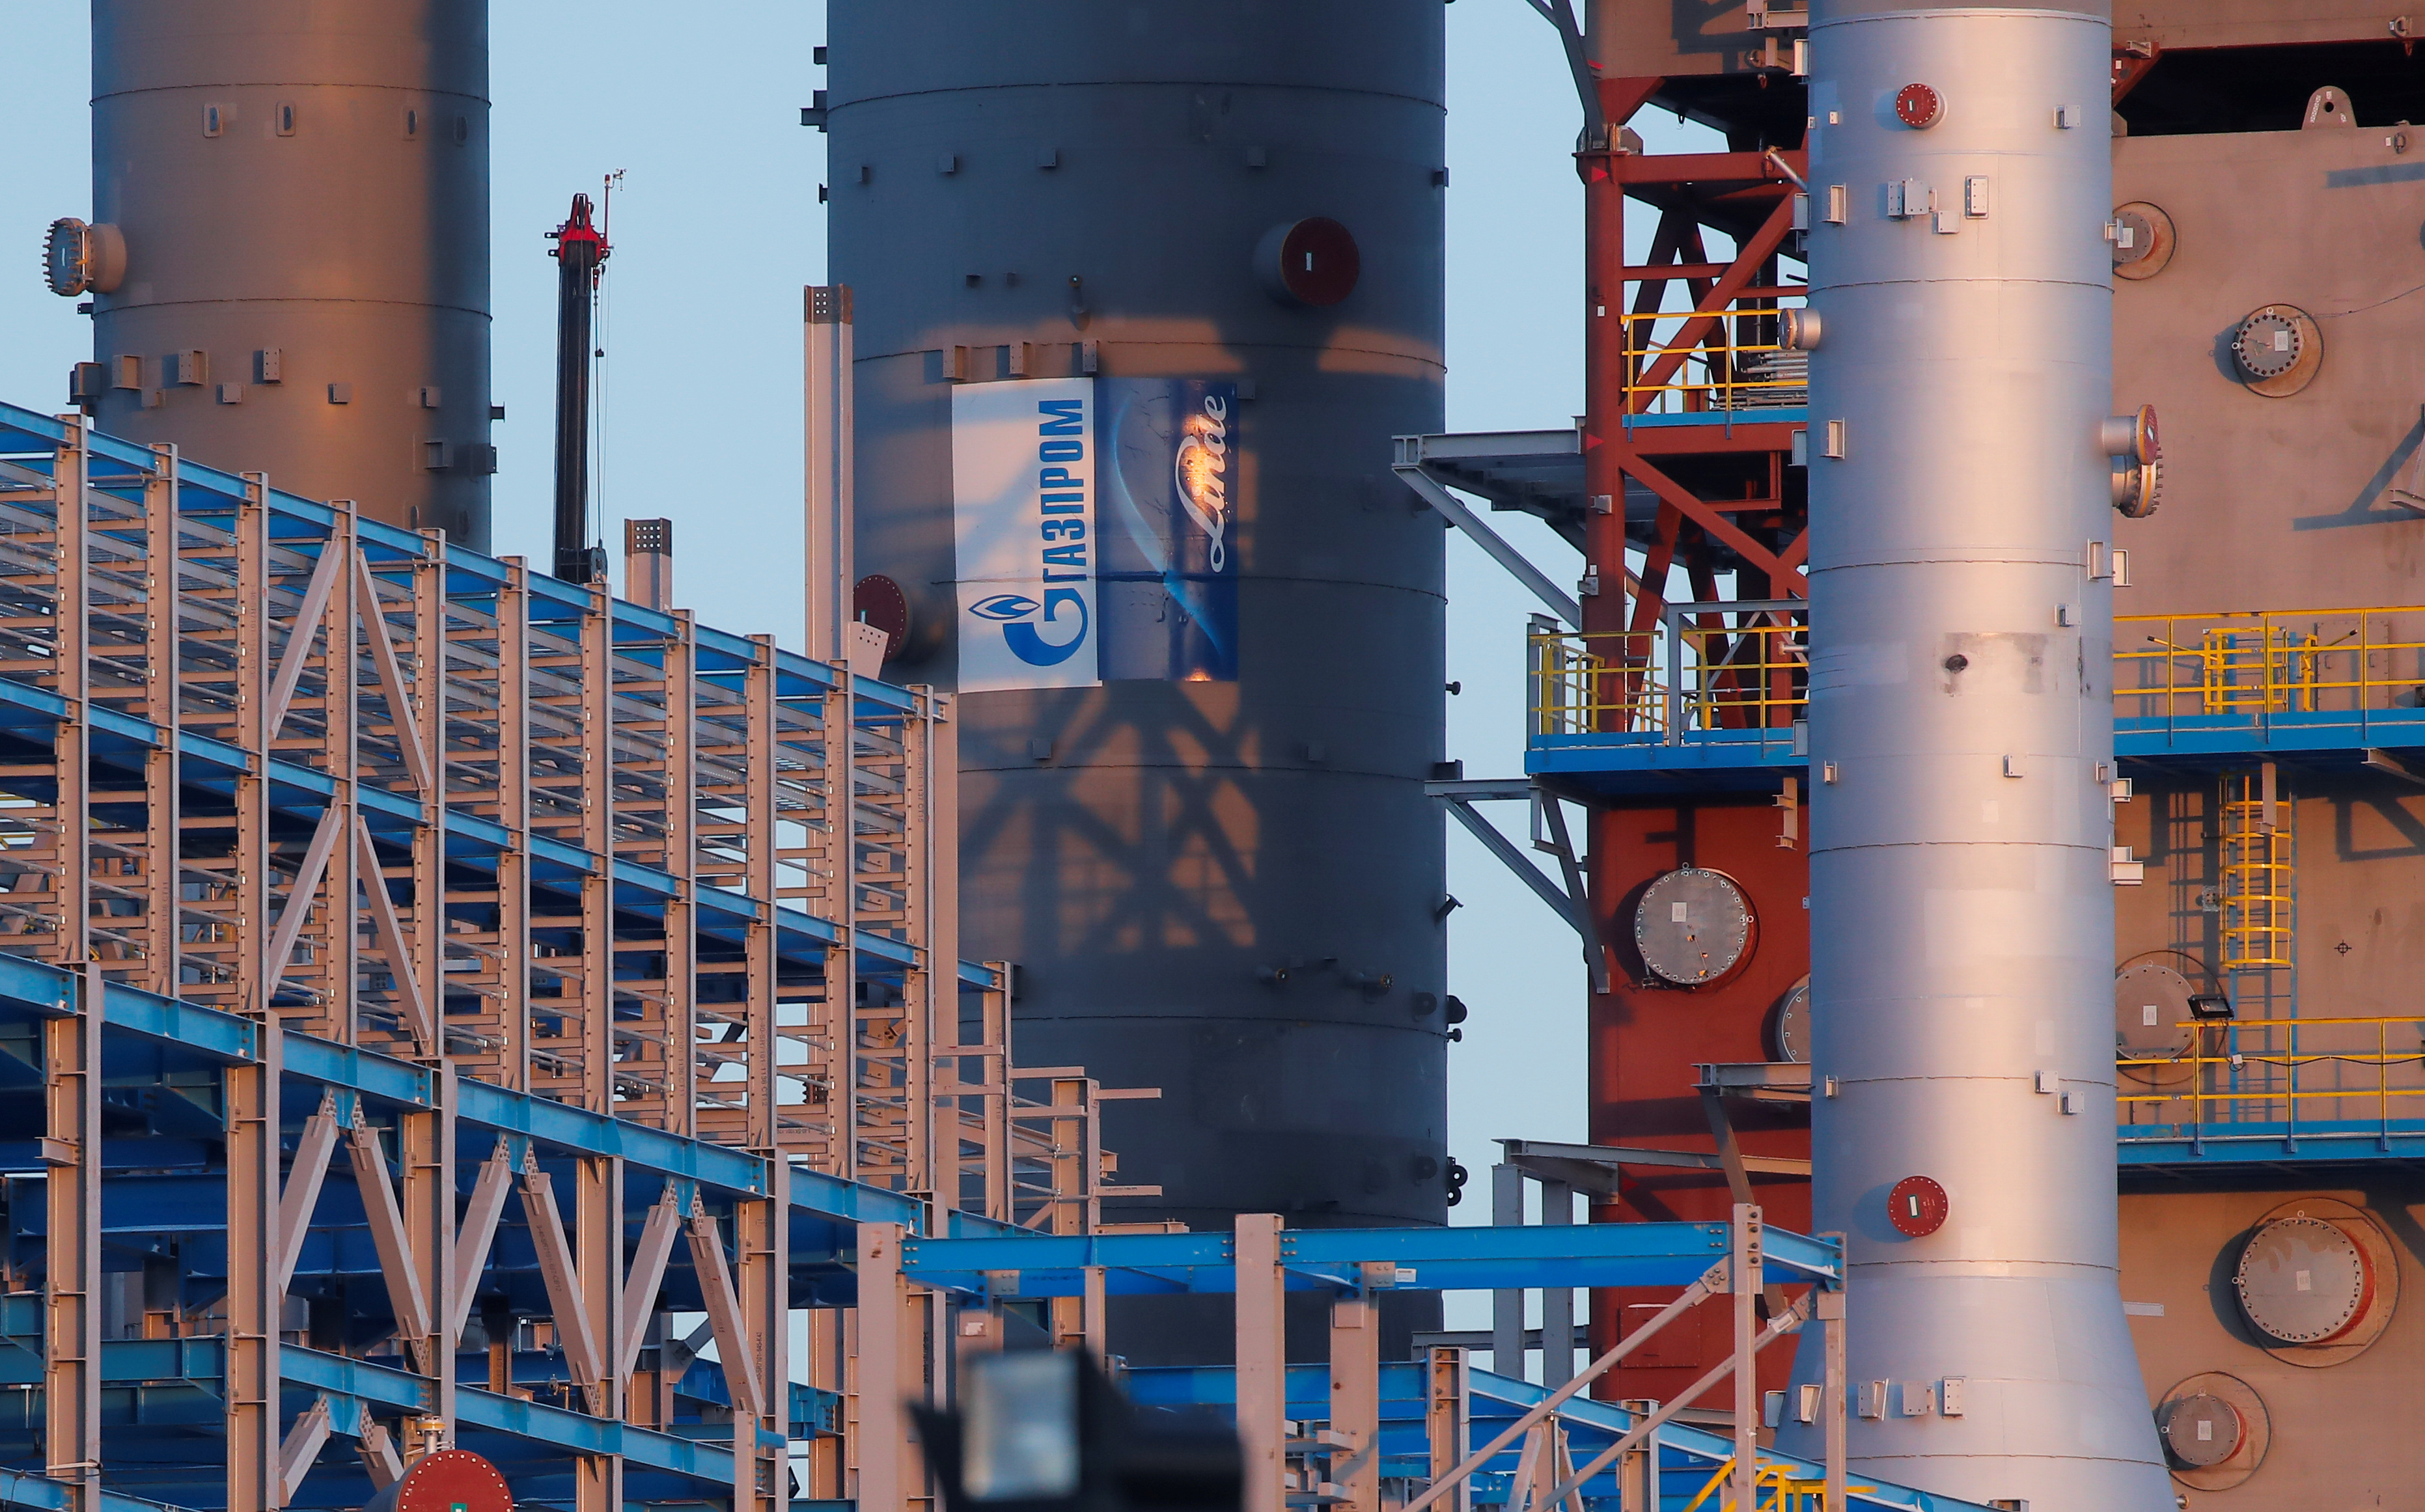 Gazprom logo is seen on a gas processing column under construction at Amur gas processing plant, part of Power Of Siberia project outside the far eastern town of Svobodny